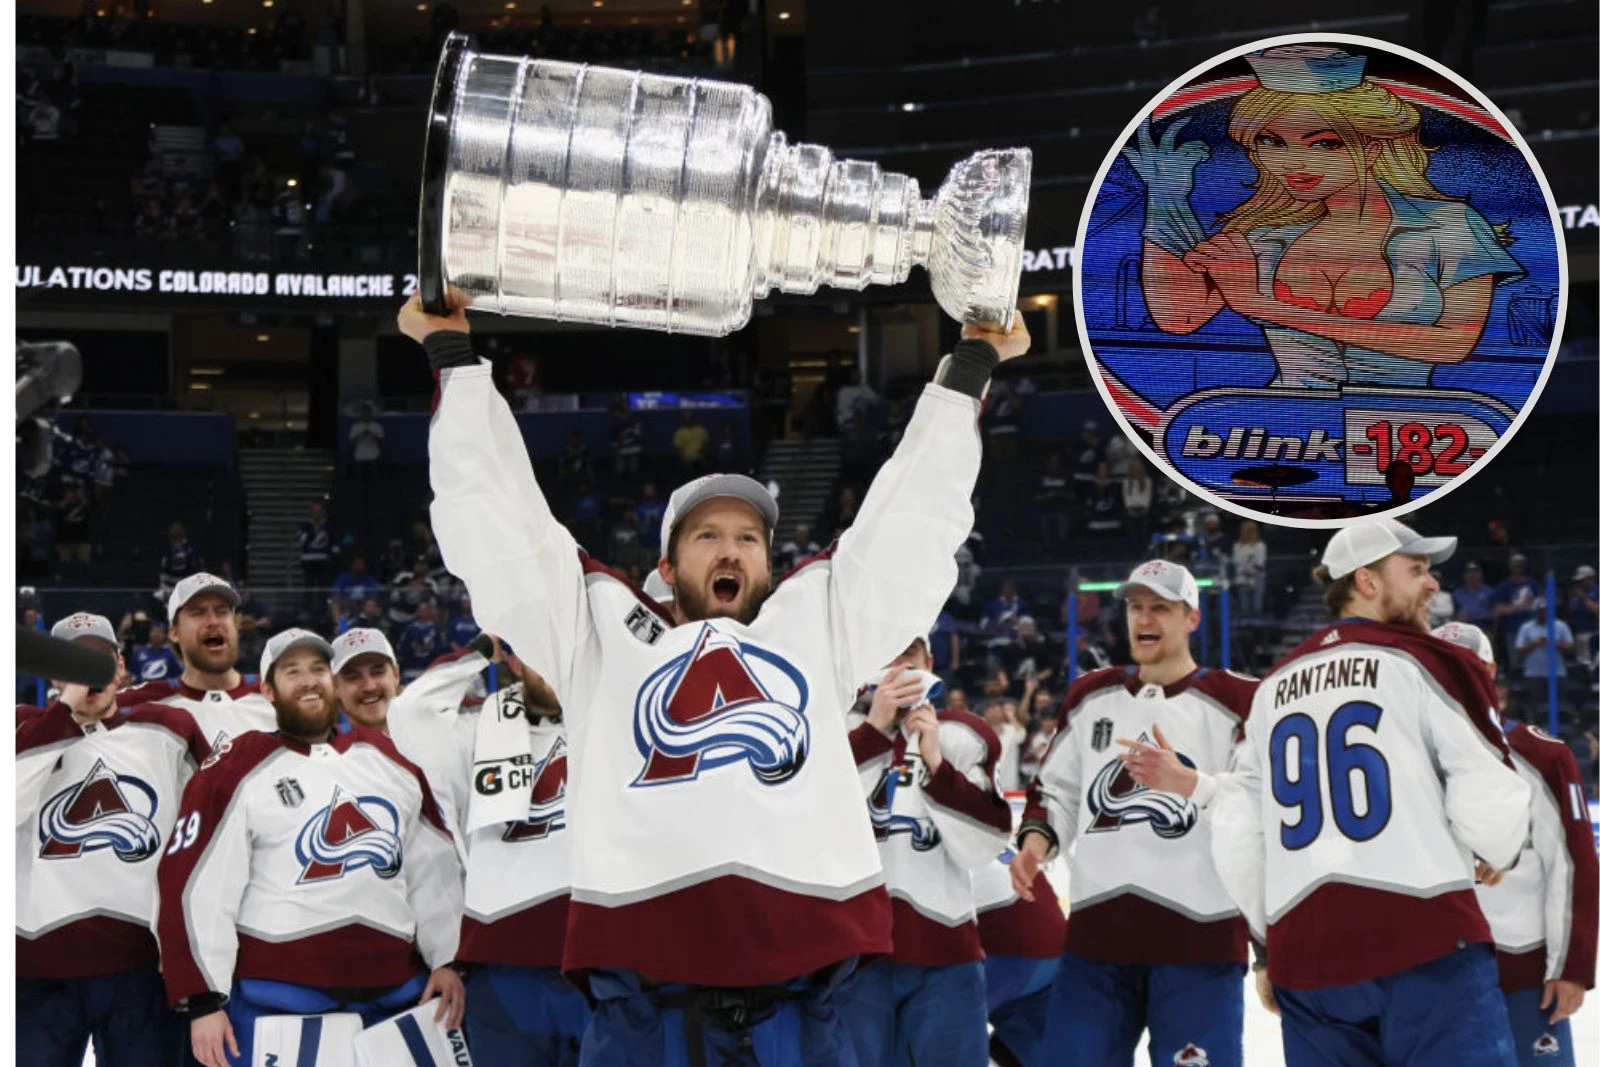 Thursday night's victory is why the NHL should fear the Colorado Avalanche